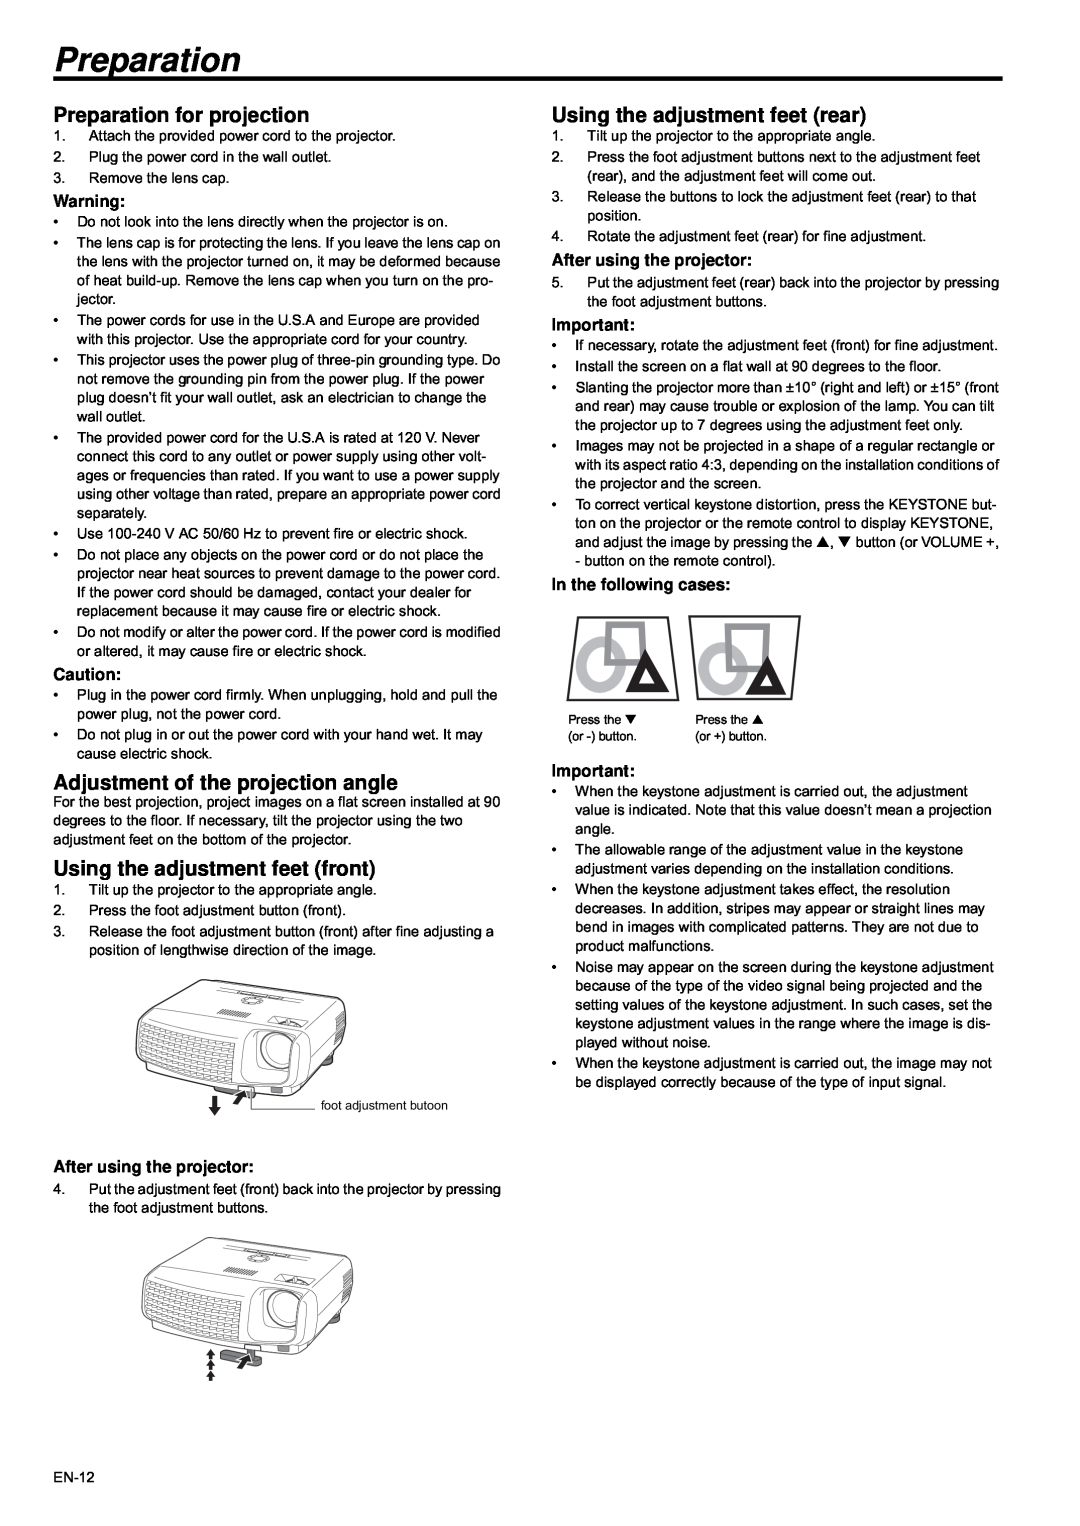 Mitsubishi Electronics XD435U-G user manual Preparation for projection, Adjustment of the projection angle 